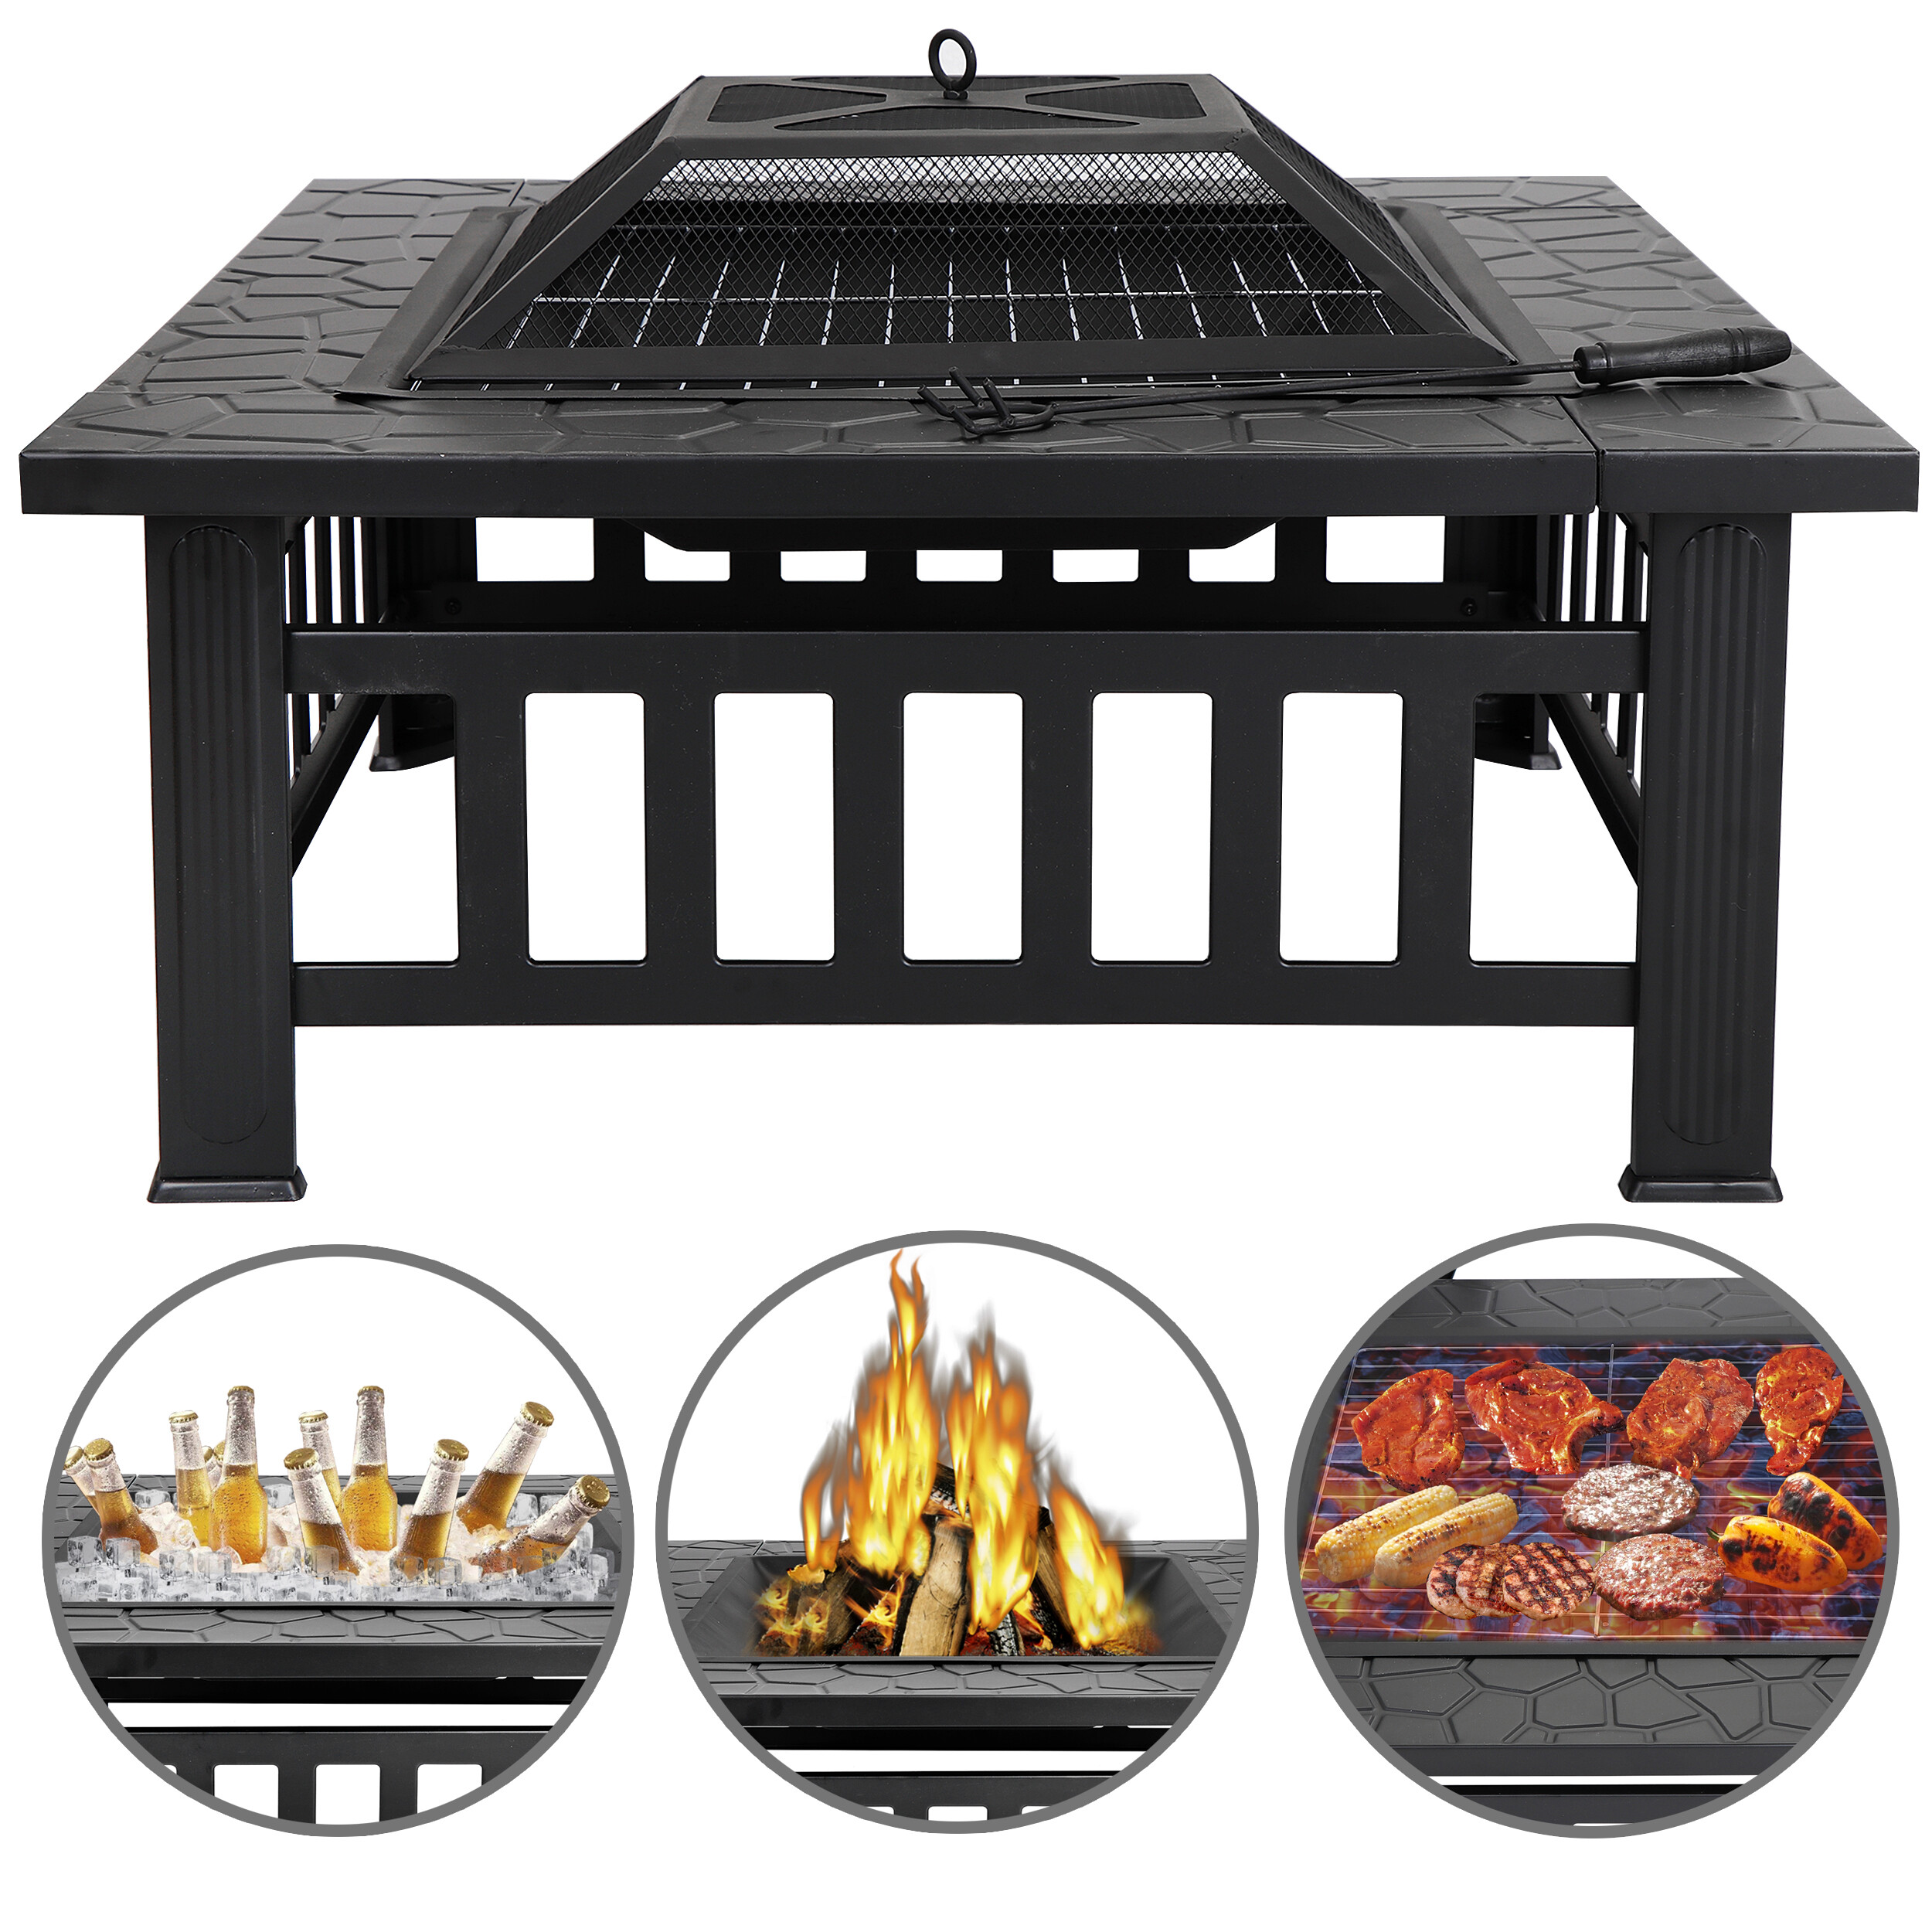 ZENY 32" Outdoor Fire Pit Square Metal Firepit Patio Garden Stove Wood Burning - image 3 of 12